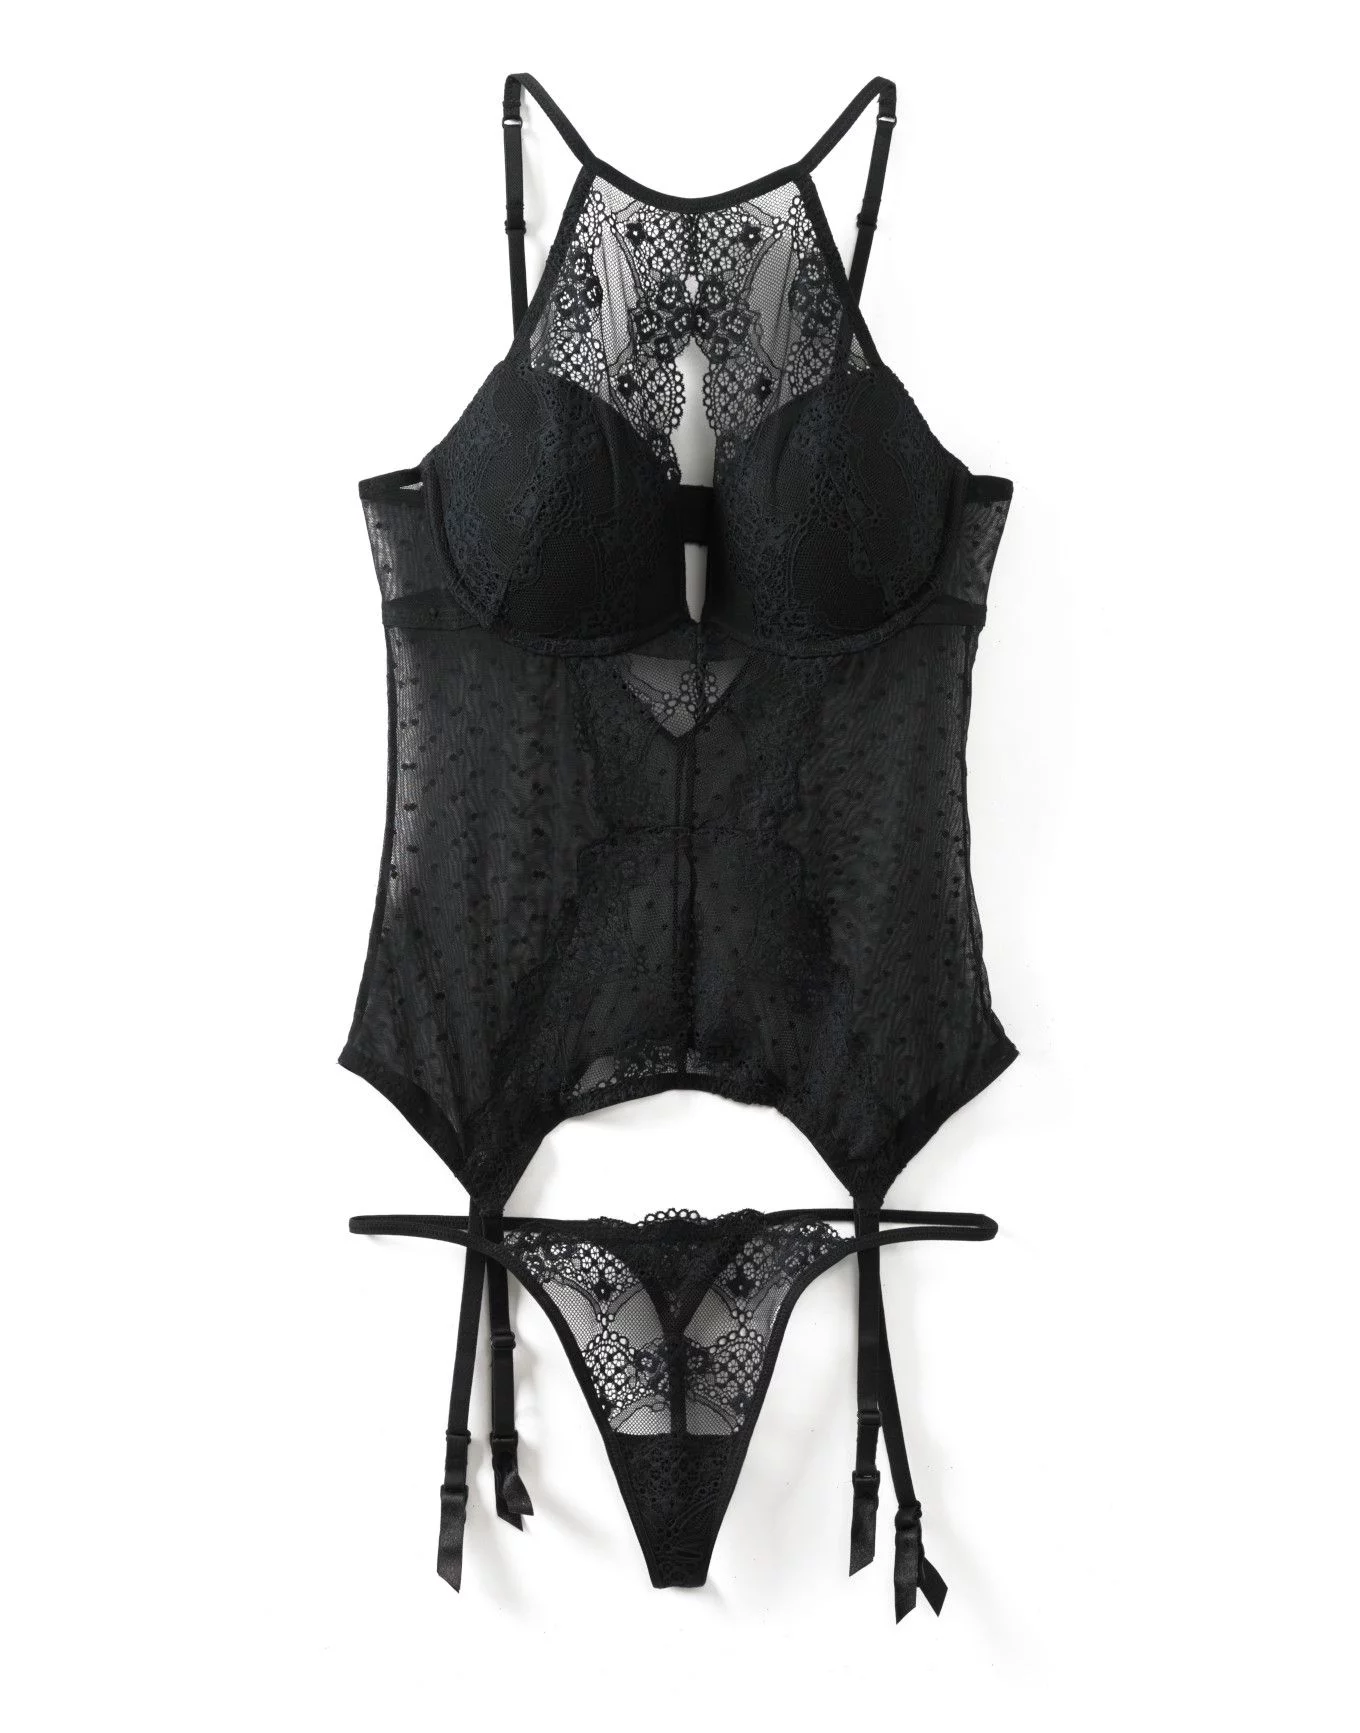 Adore Me - Listen up: This bestselling bustier is selling FAST